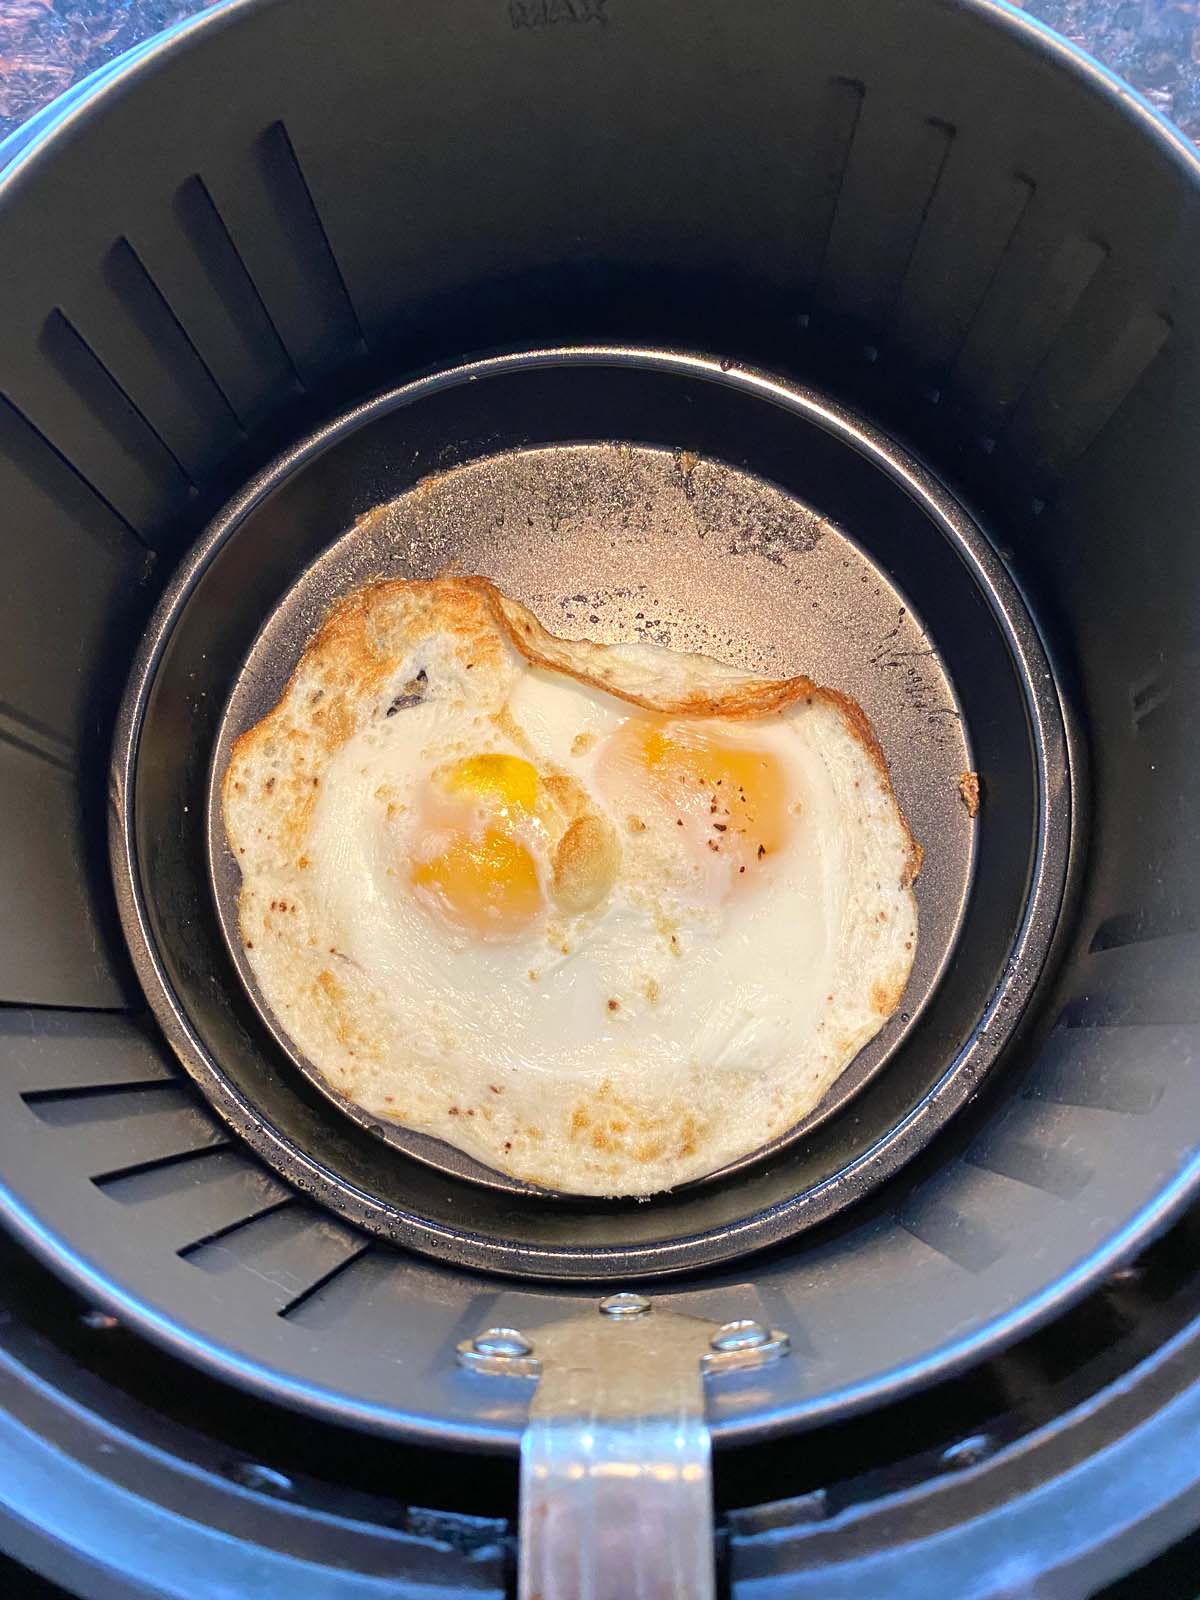 A set of eggs cooked in the air fryer.